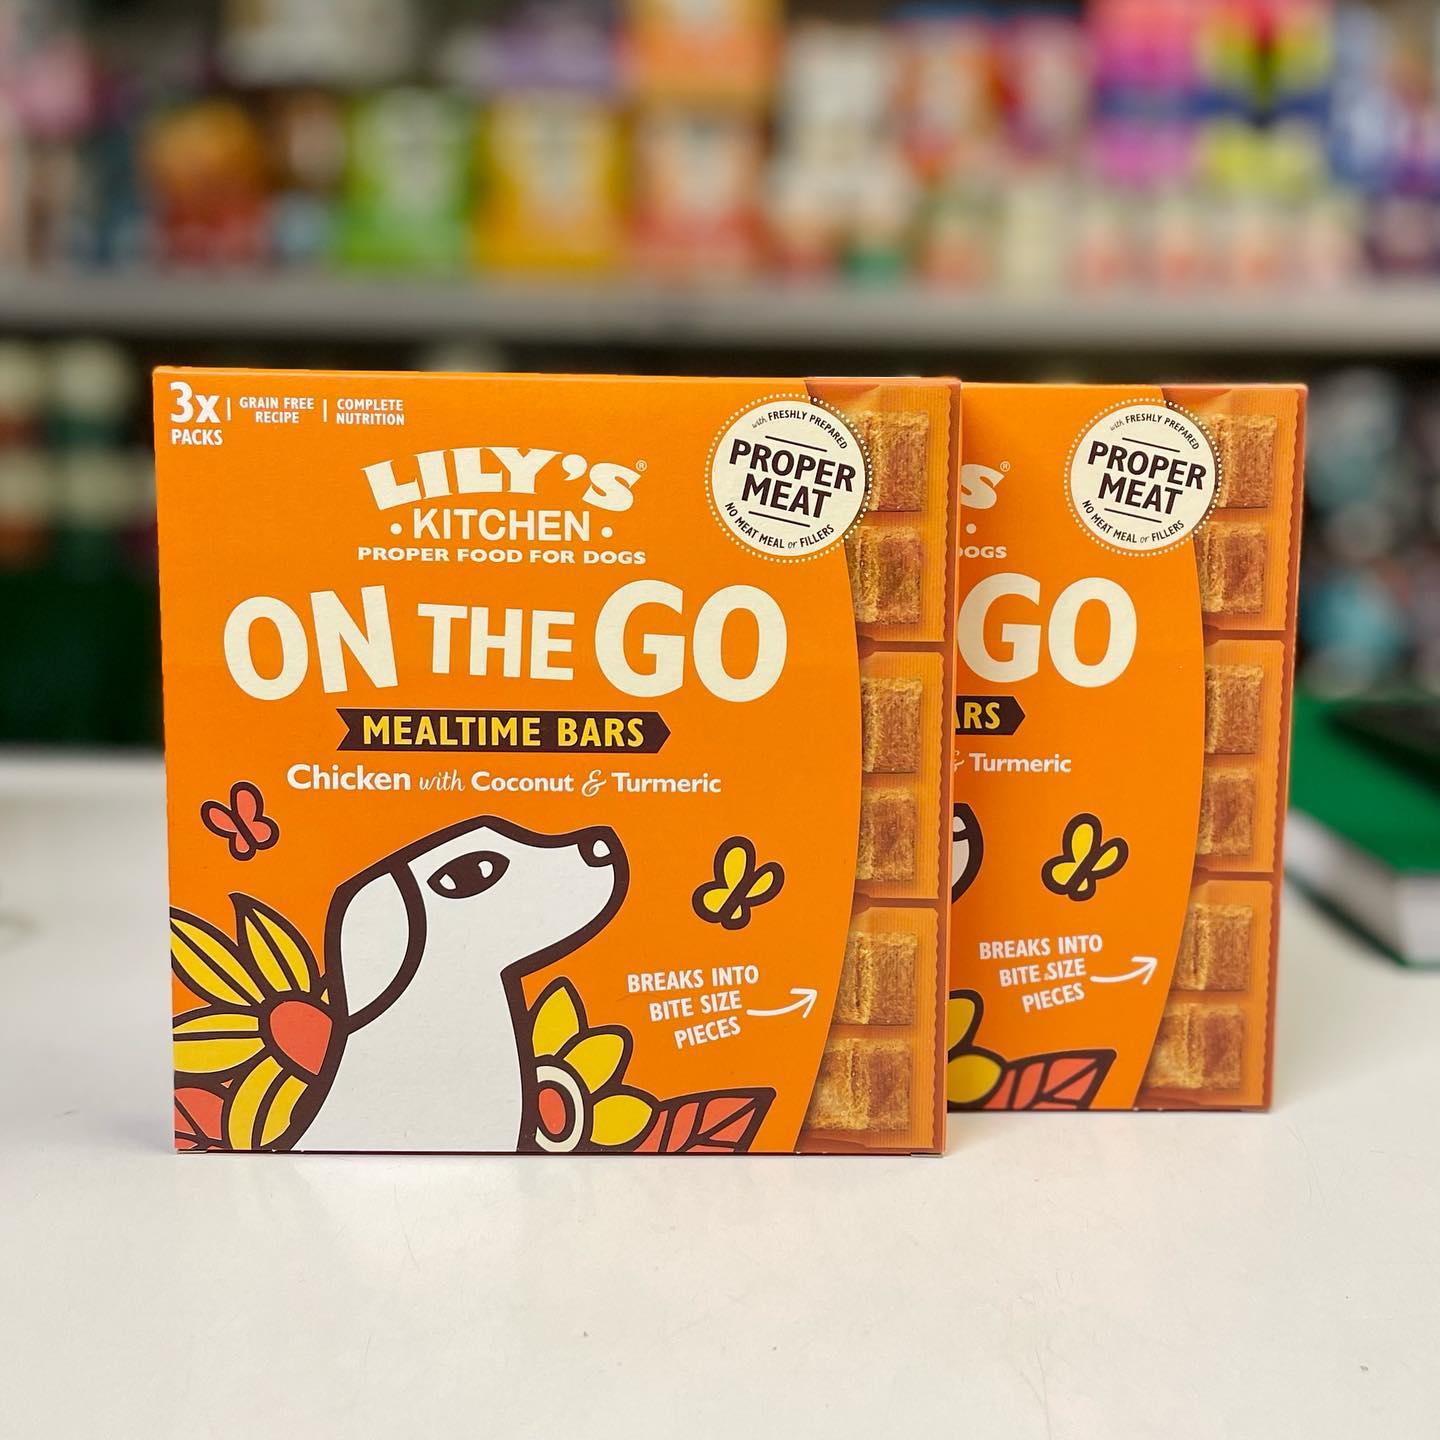 On the go mealtime bars